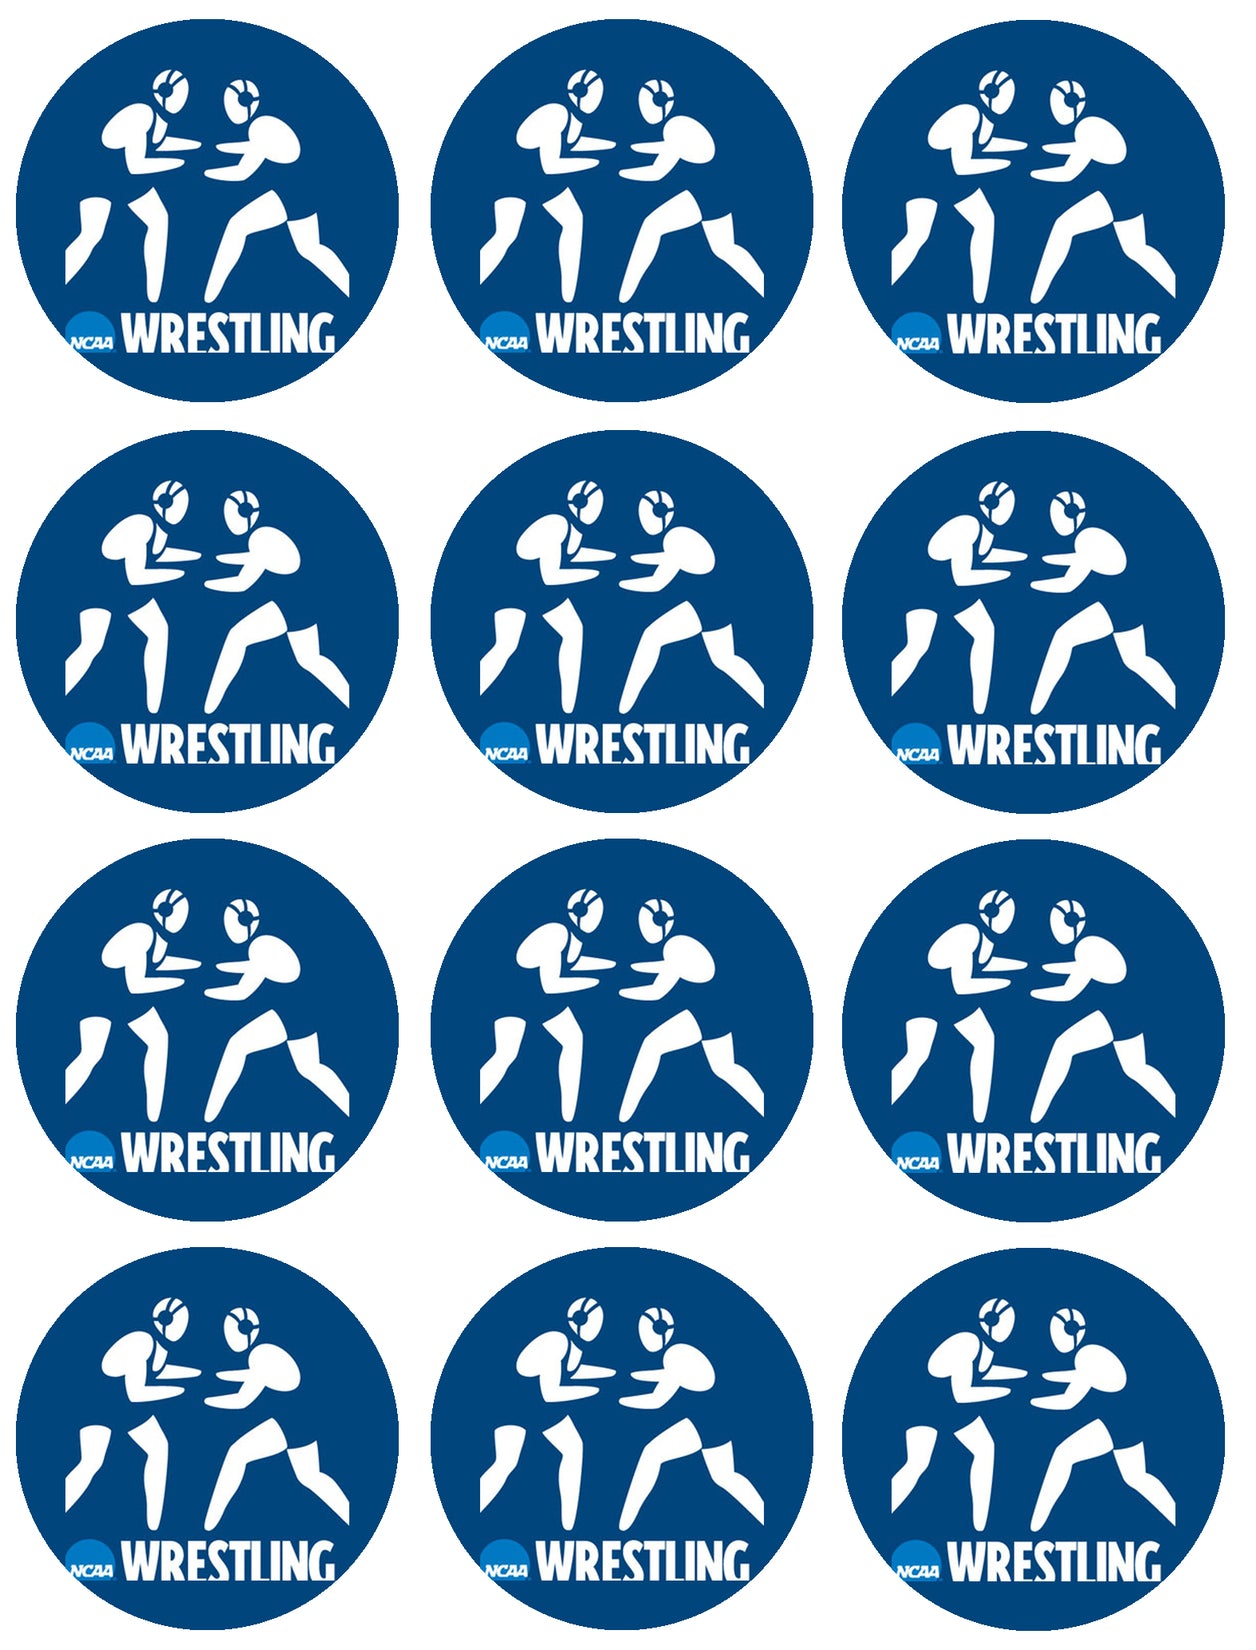 NCAA Wrestling Logo and Silhouettes Edible Cupcake Topper Images ABPID55985